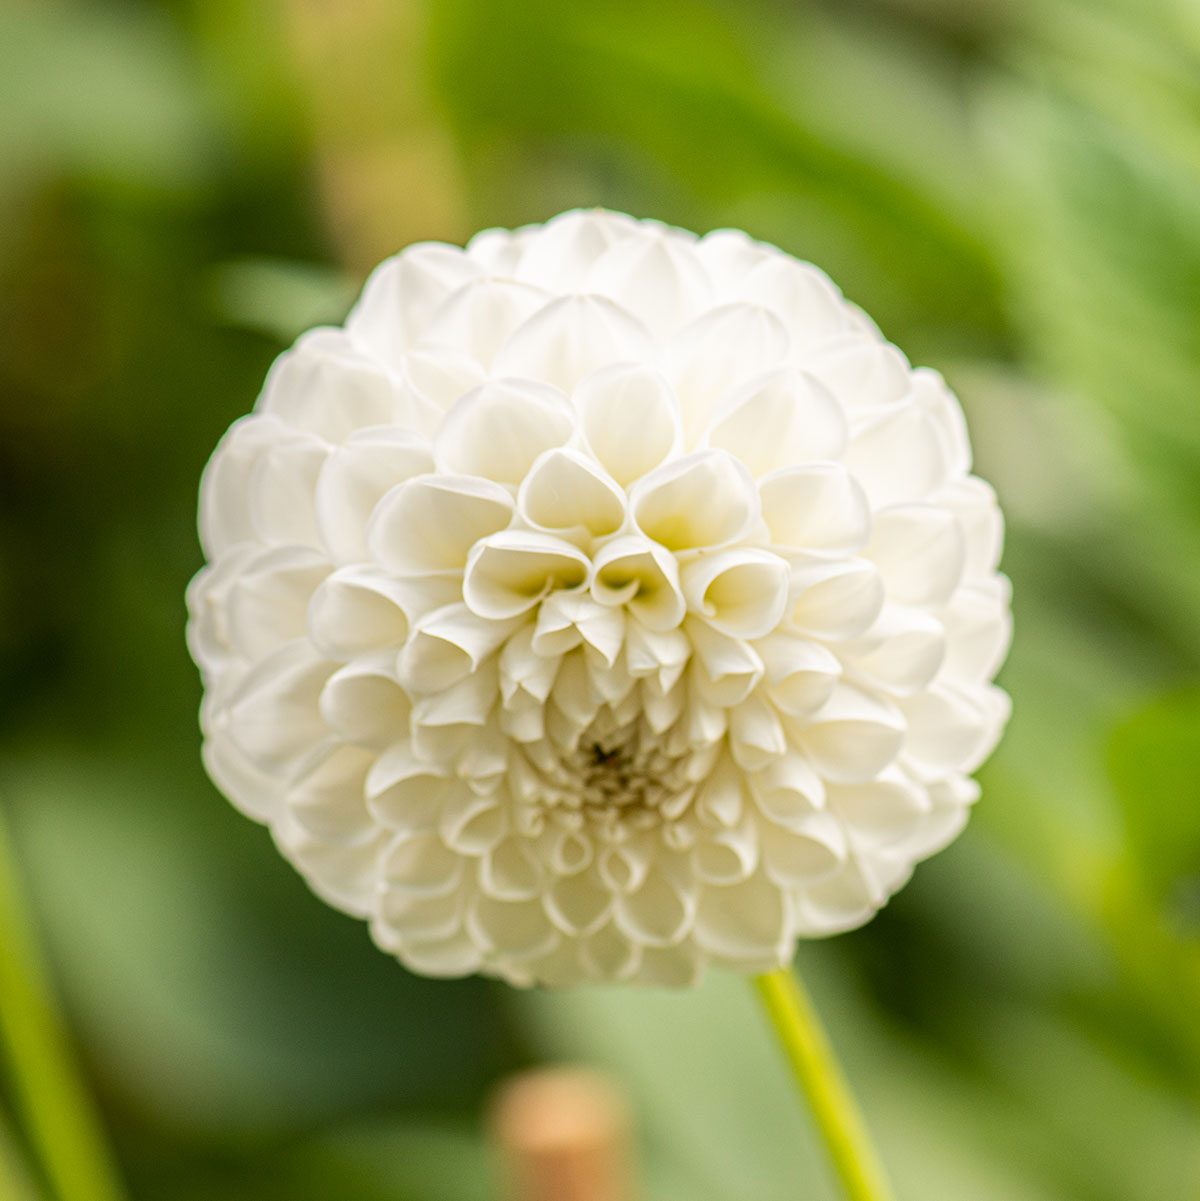 Flower Of A White Dahlia pictured in a luscious green garden on a bright sunny day.